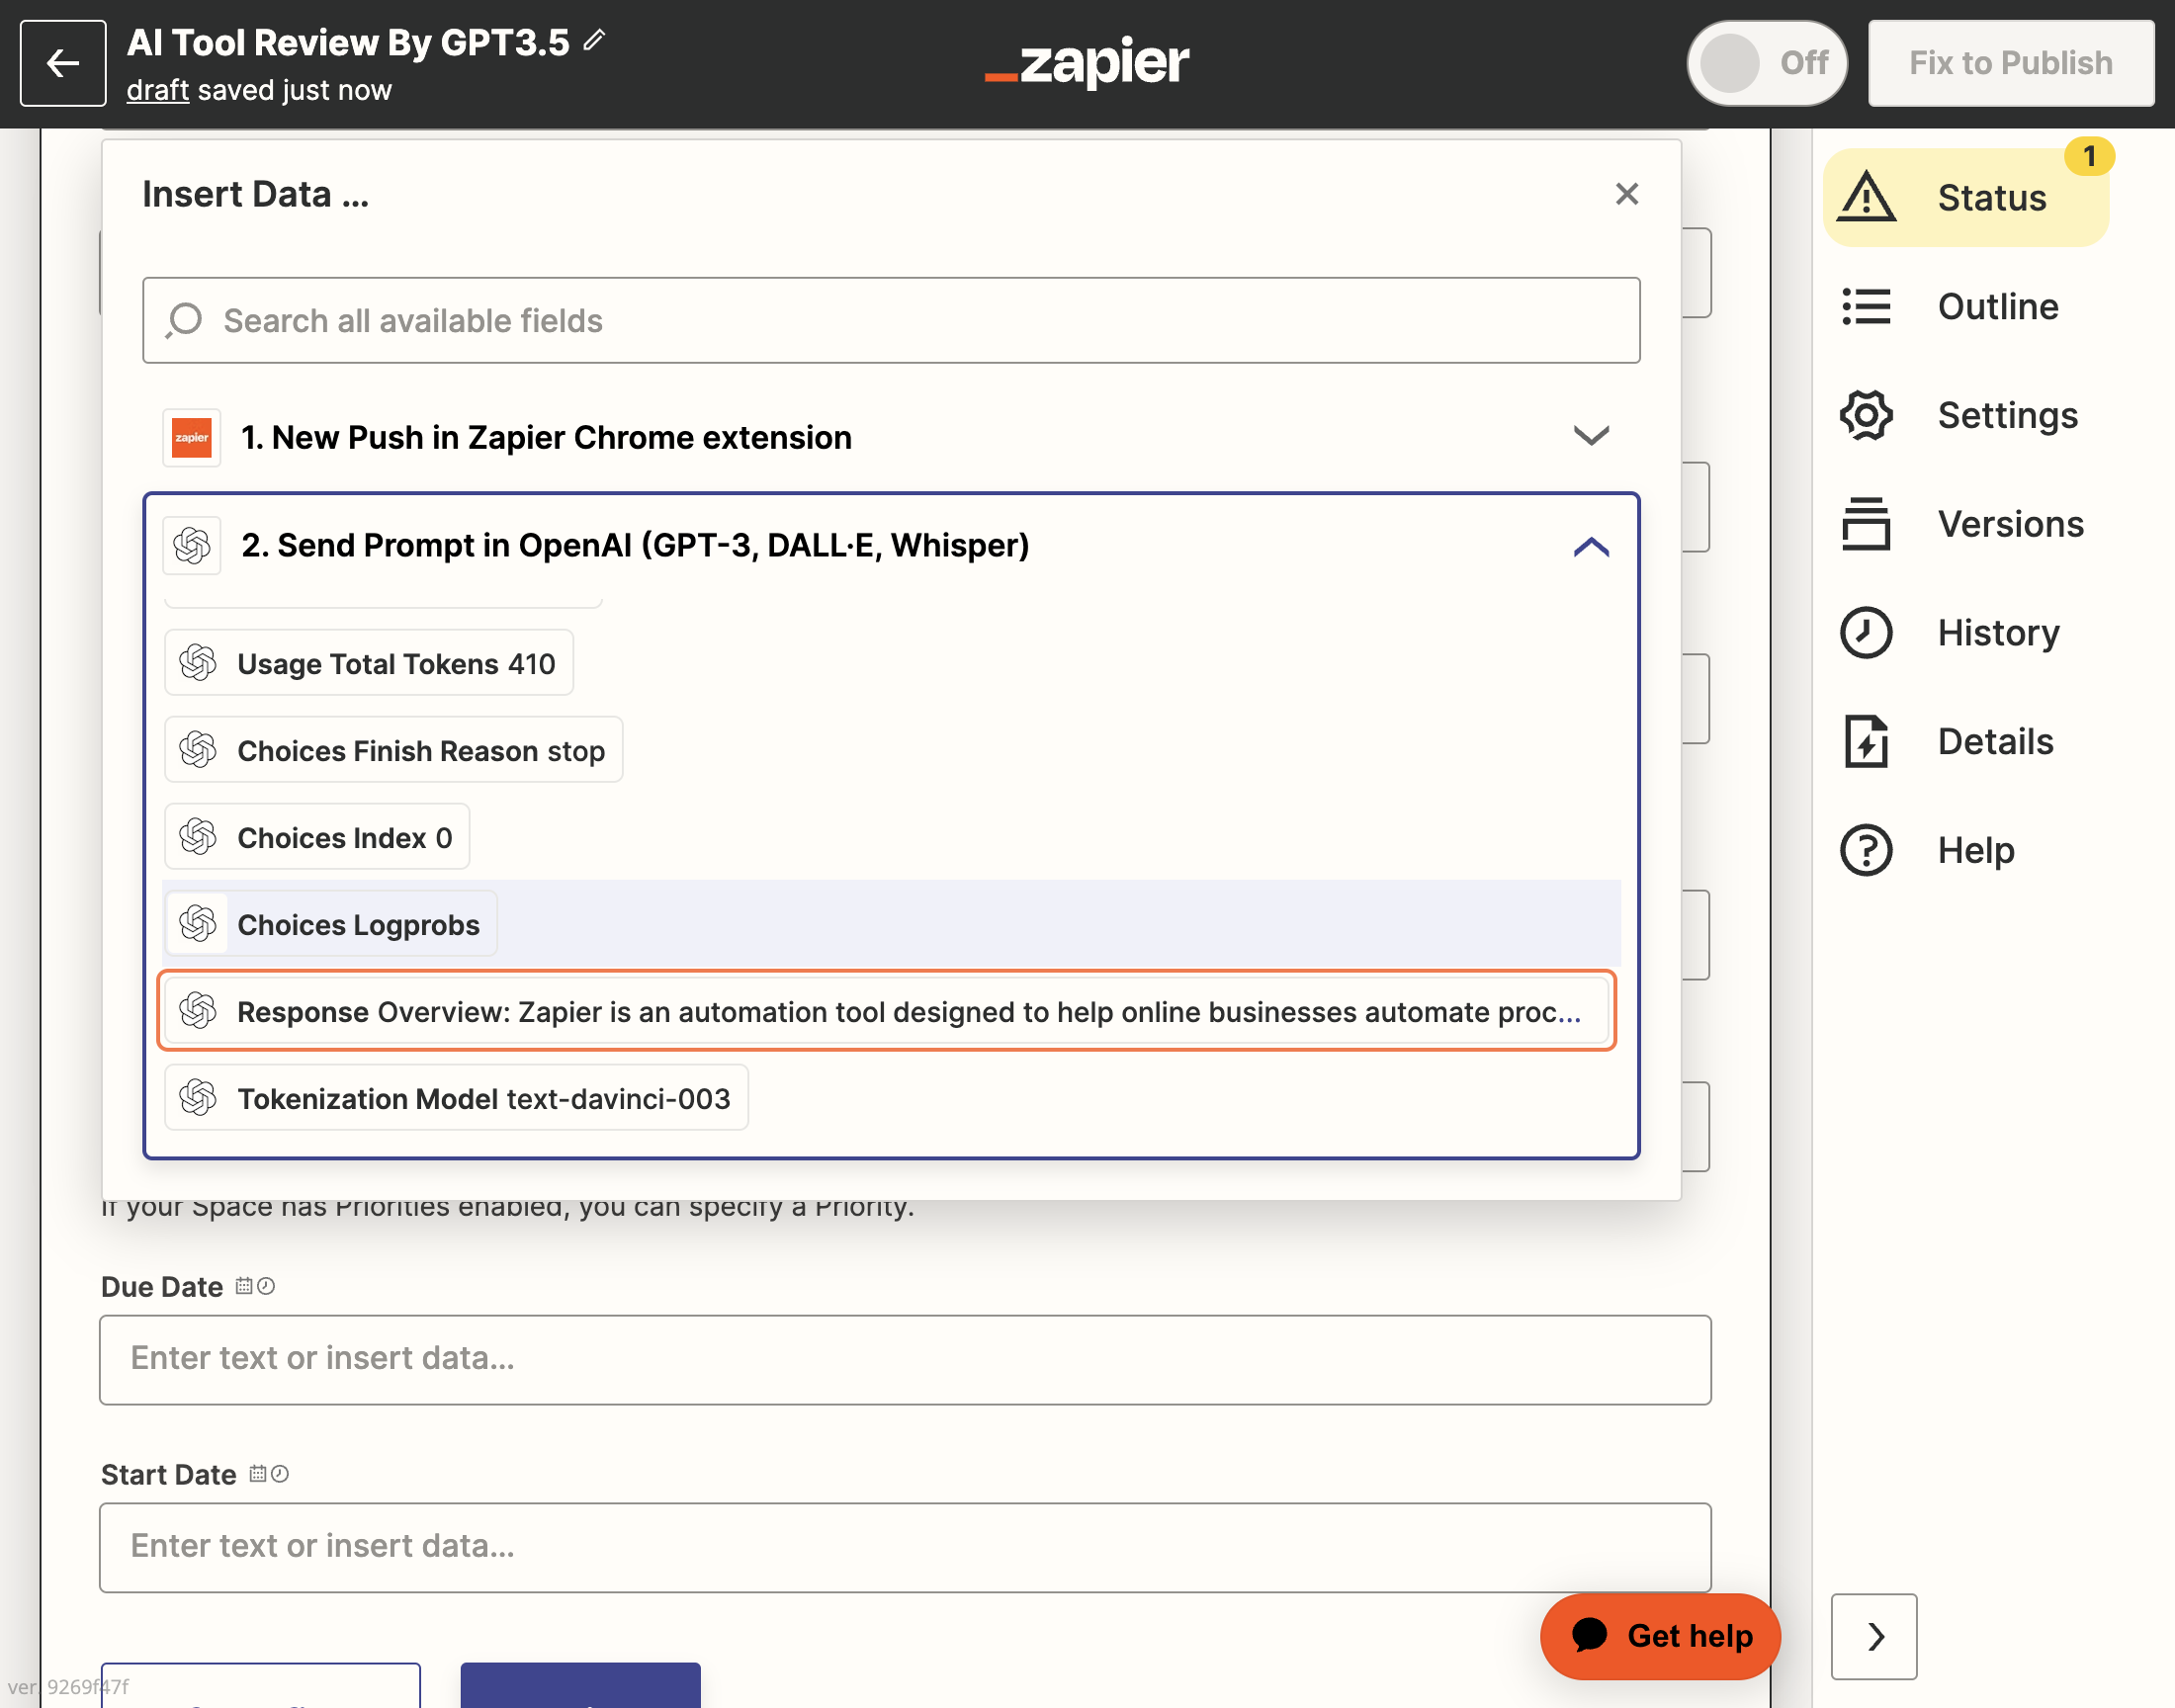 Click on Response Overview: Zapier is an automation tool designed to help online businesses automate processes, save time, and improve efficiency. It allows users to connect apps they are already using and automate workflows between them. Top Three Features: • Automation: Zapier …